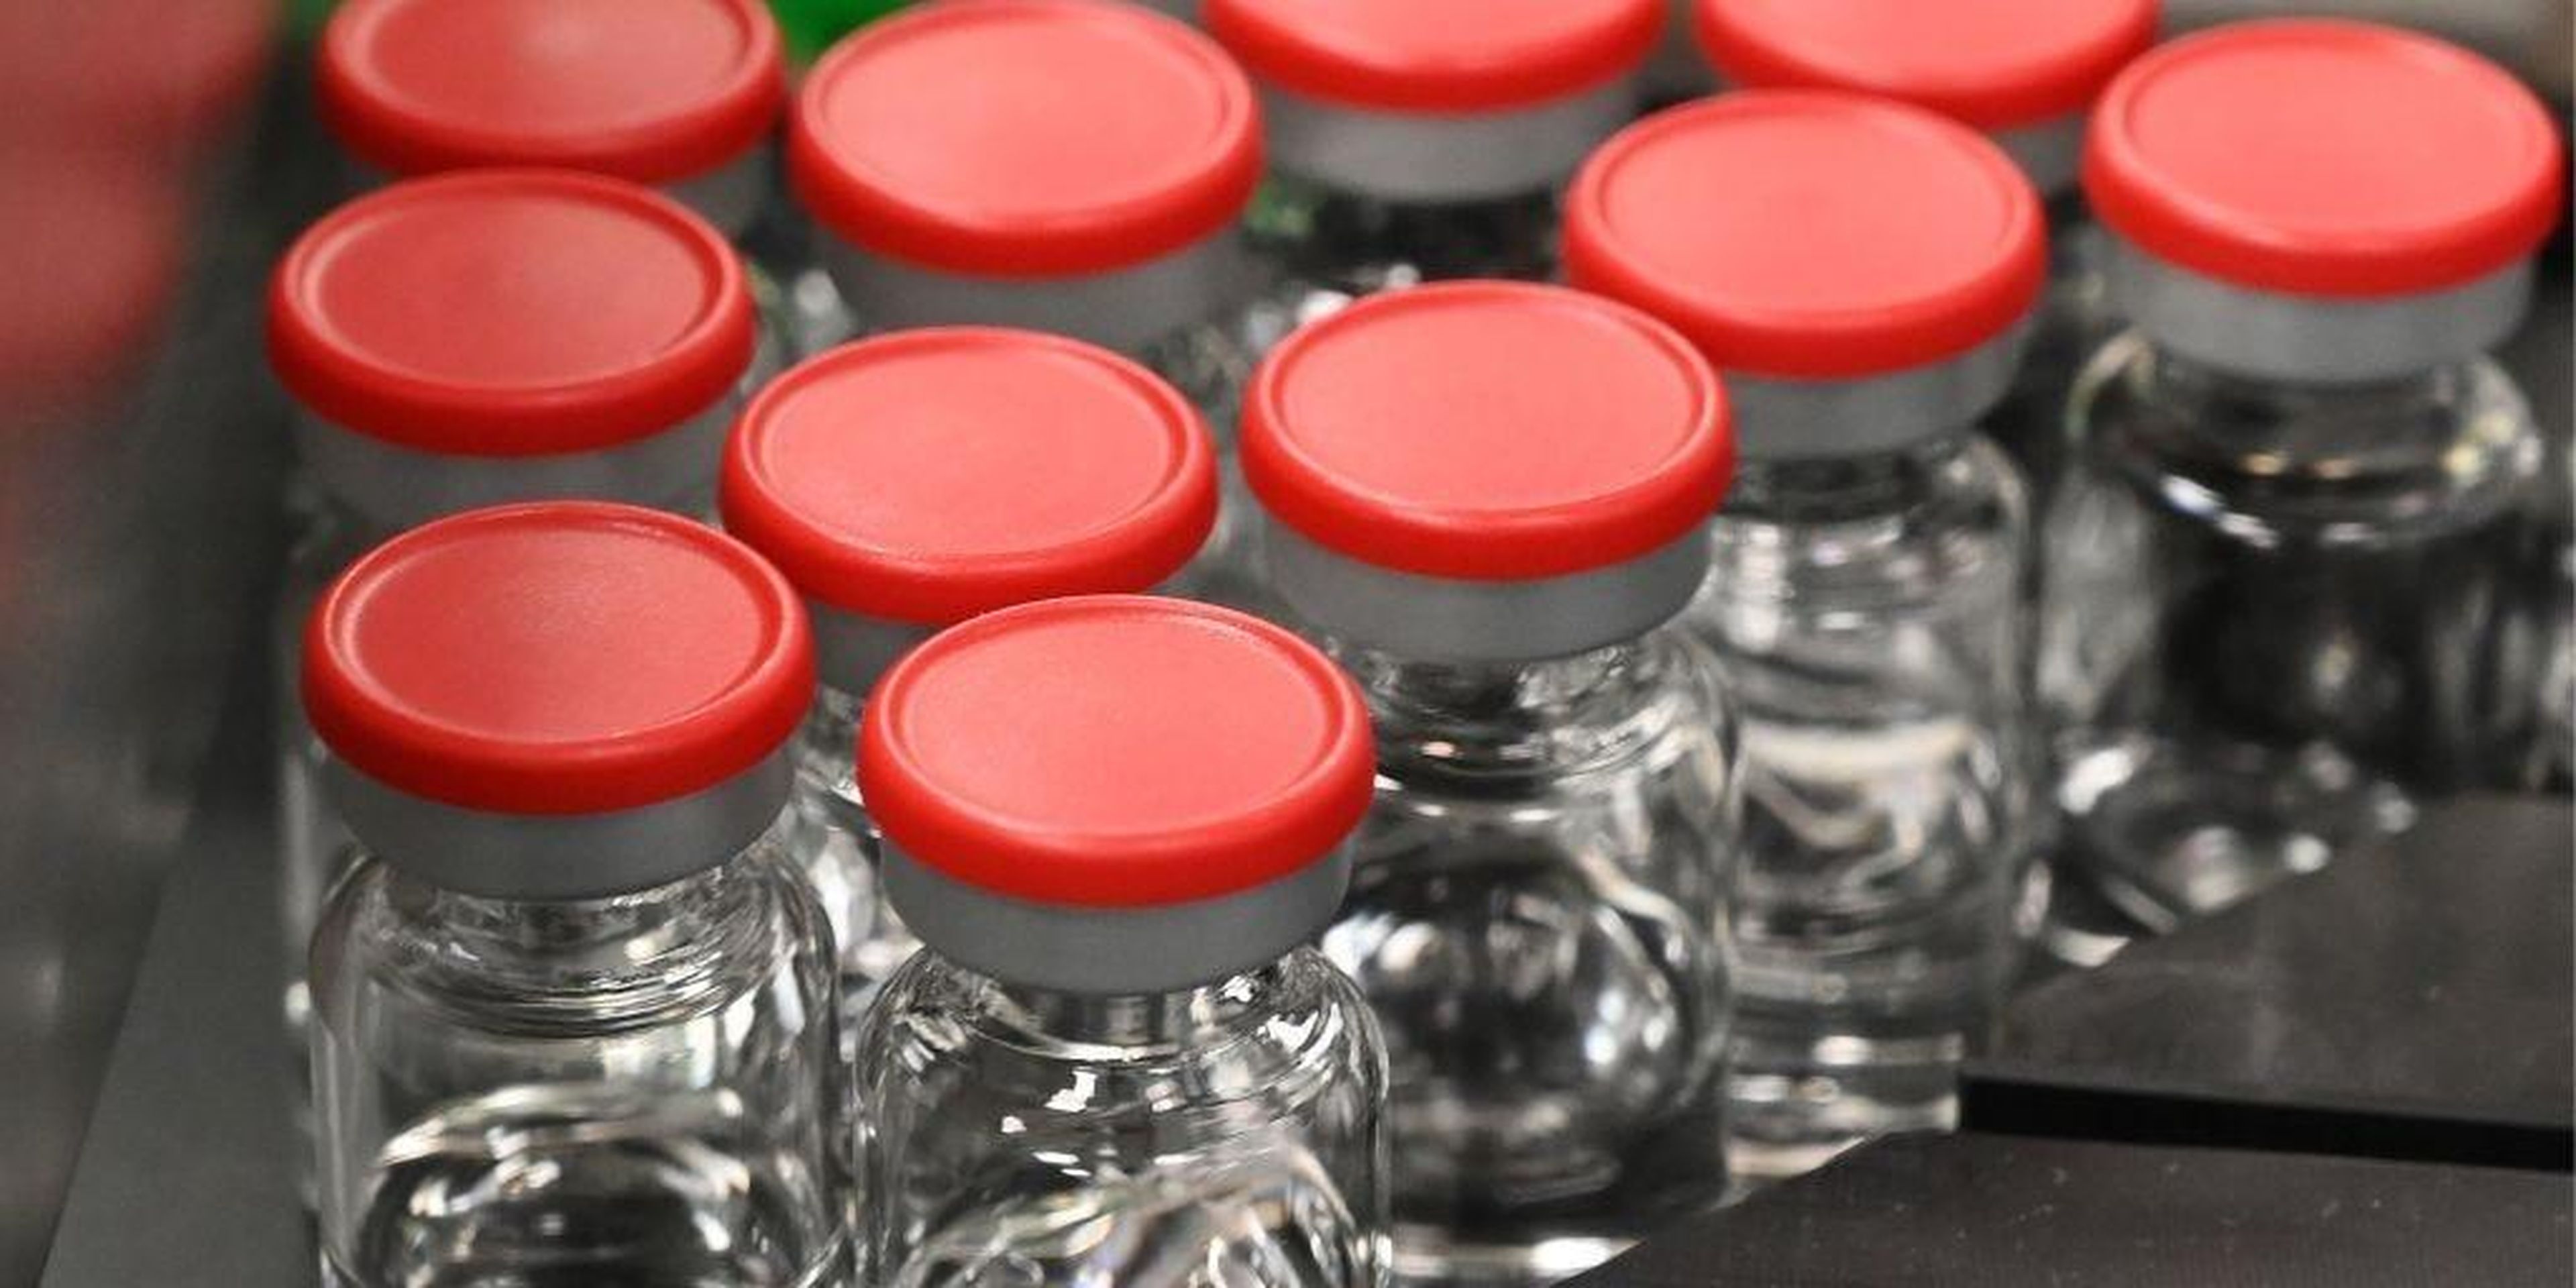 Capped vials are being pictured during filling and packaging tests for the large-scale production and supply of the University of Oxford's COVID-19 vaccine candidate, AZD1222.